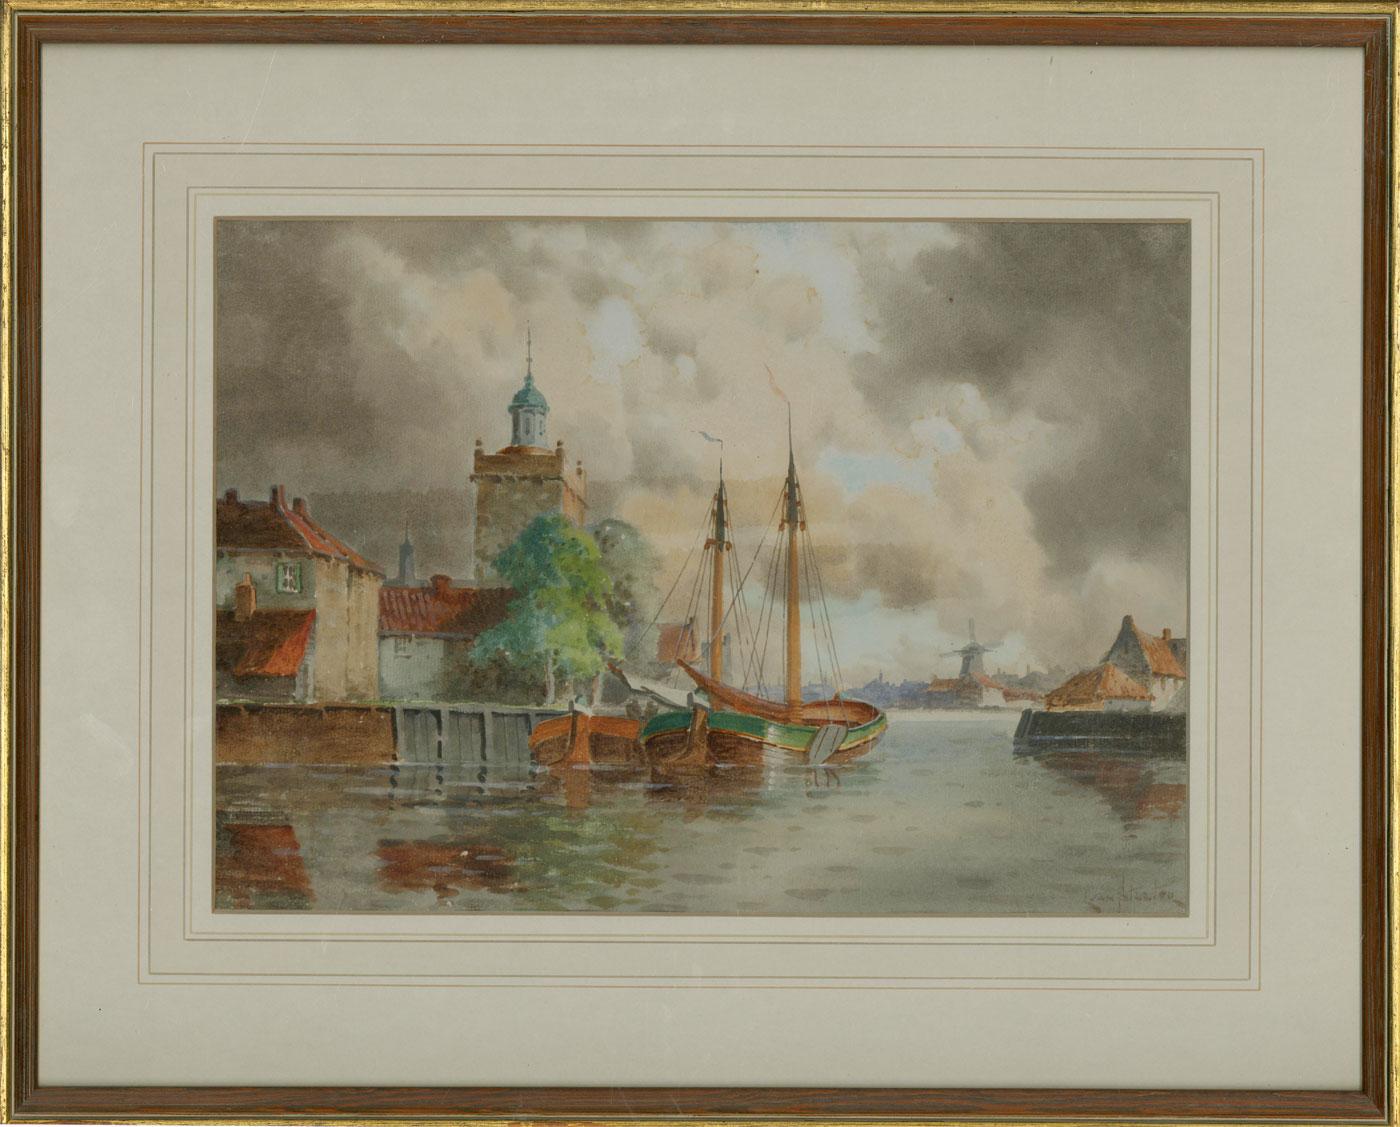 A fine original watercolour by the Dutch painter Louis Van Staaten, also known as Norris Fowler Willatt  and Jan van Coever. The artist has chosen a calm harbour canal setting with fishing boats. Signed to the lower right. Well-presented in a